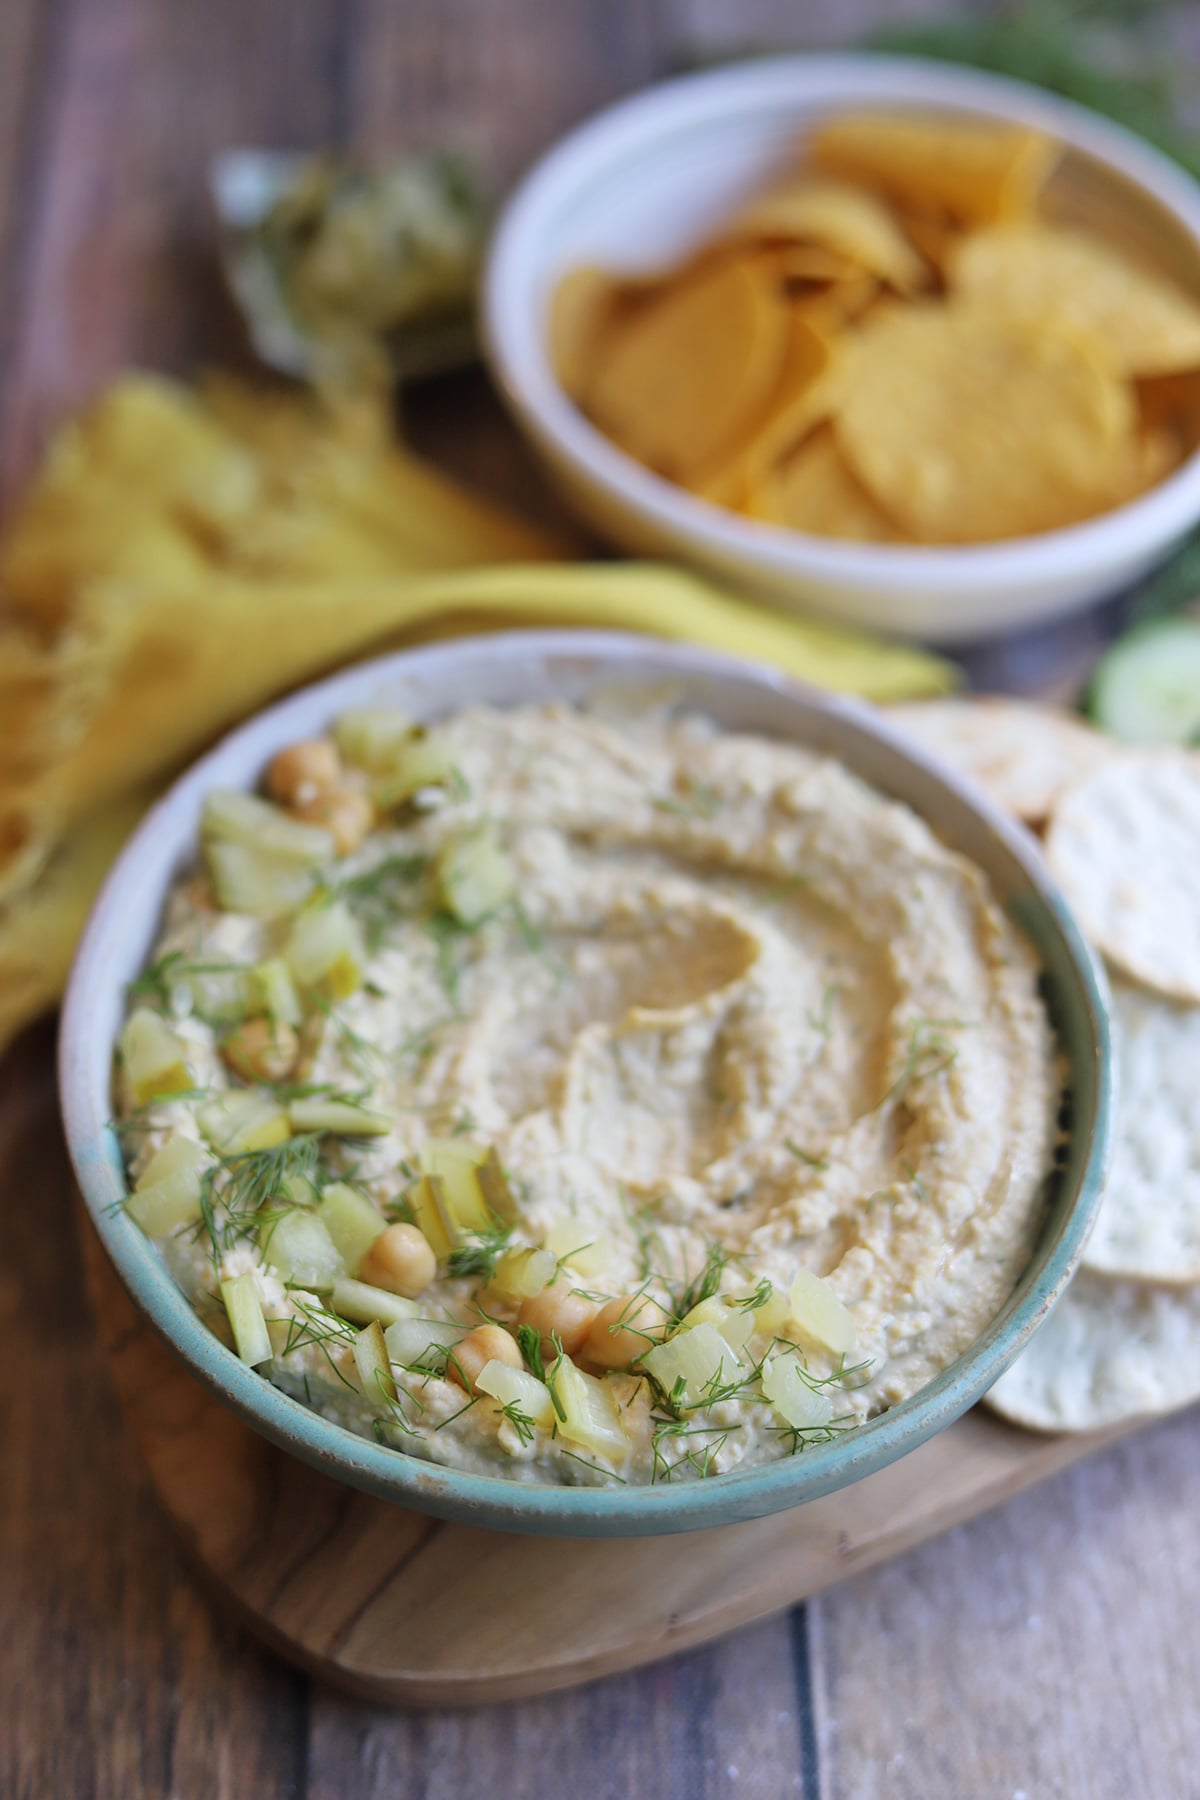 Pickle hummus on table with tortilla chips.